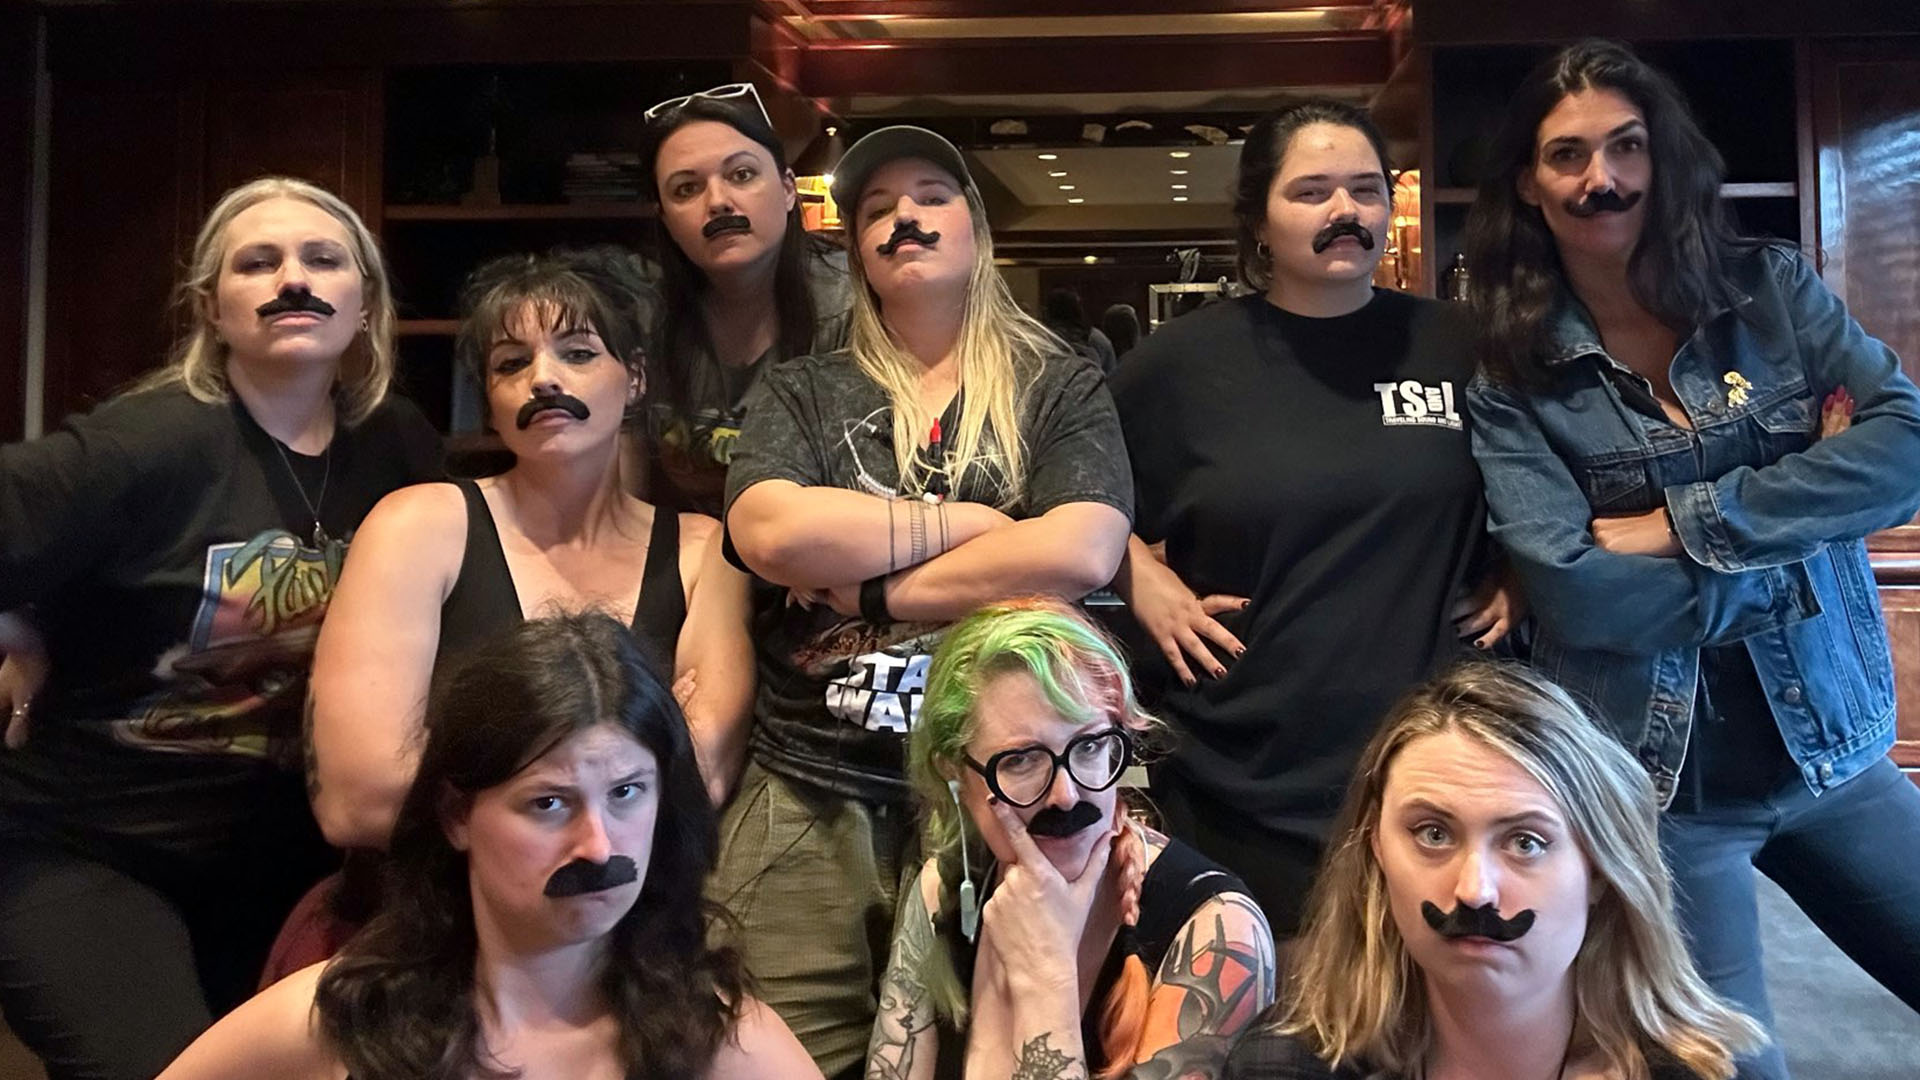 crew - girls with moustache